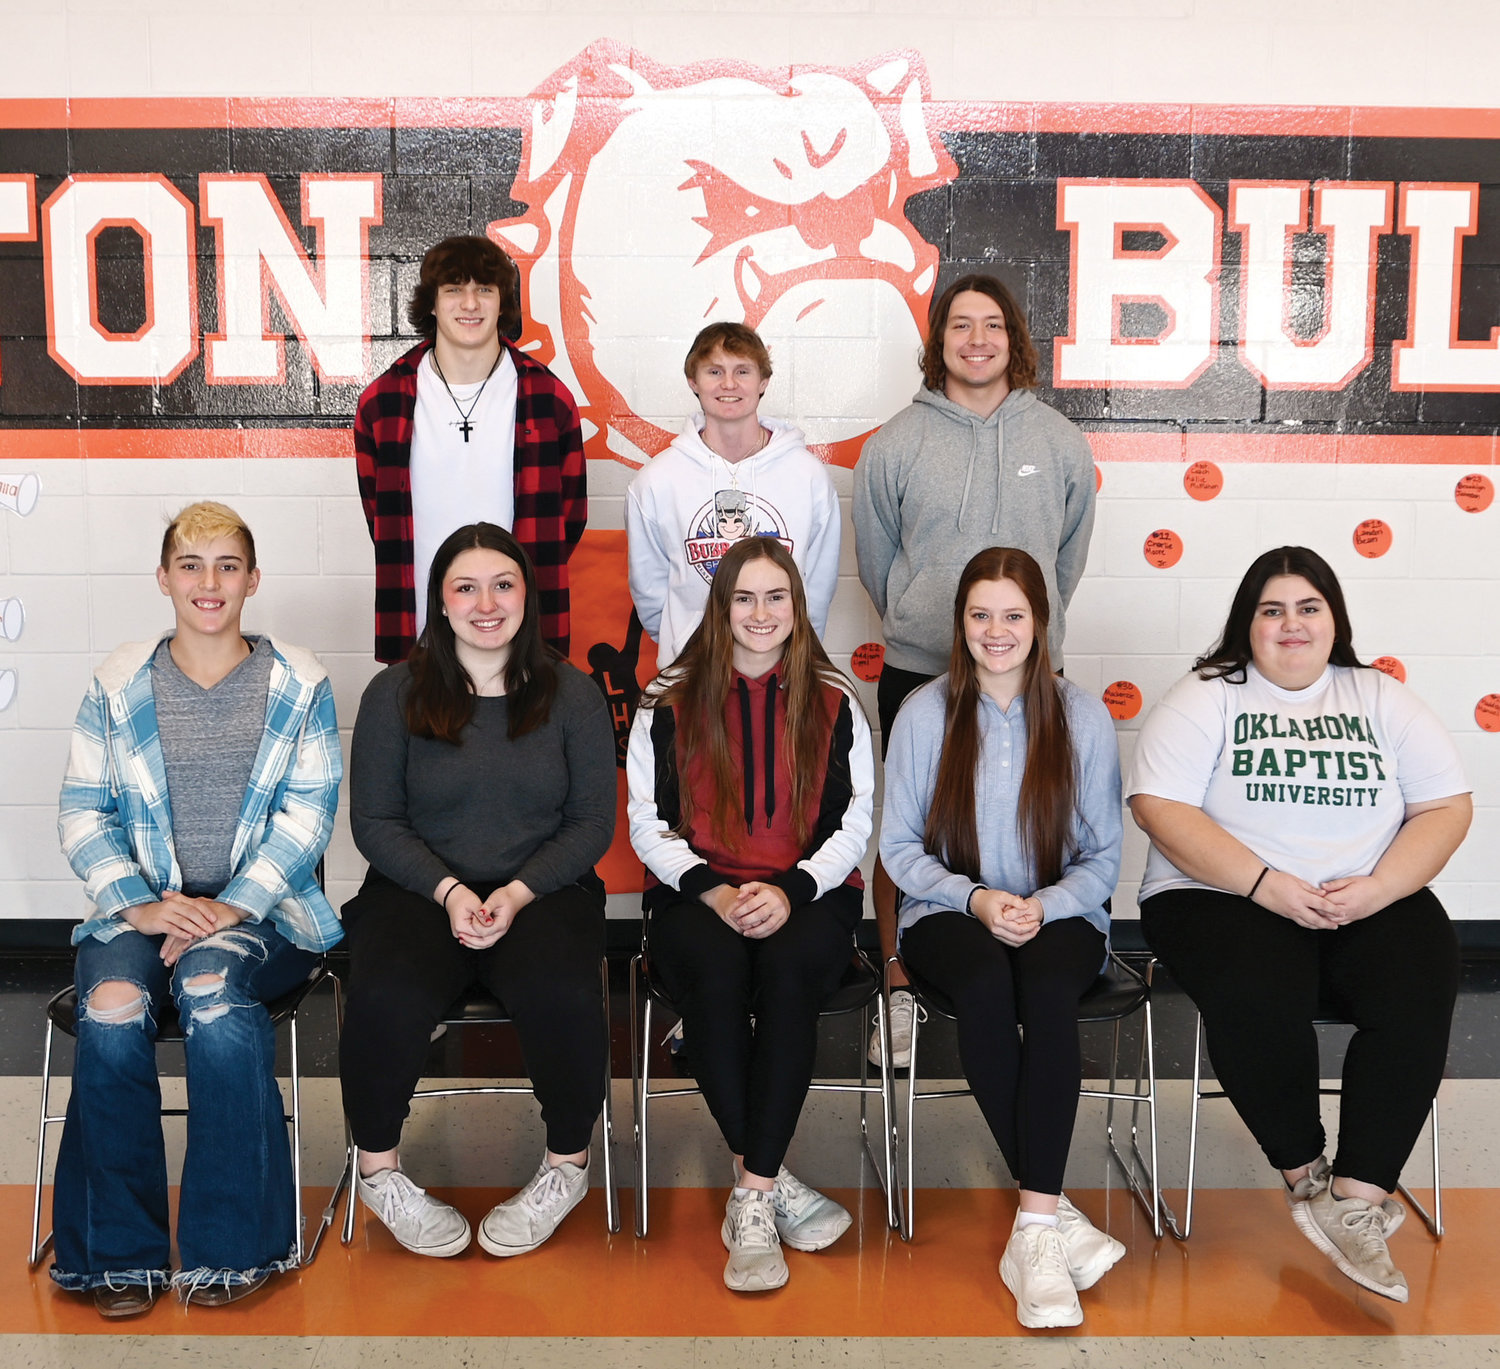 Lexington High School’s homecoming coronation will be held Friday at 6 p.m. at the Lexington Gymnasium prior to basketball games against Purcell. This year’s court includes, from front left, Izzy Pack, Kindell McBride, Janelle Winterton, Rylee Beason and Alexis Feuerborn. On the back row, from left, are Trey Hartzog, Corbin Perry and Ezra Faulkenberry. Luke Morris-Peacock was not pictured.